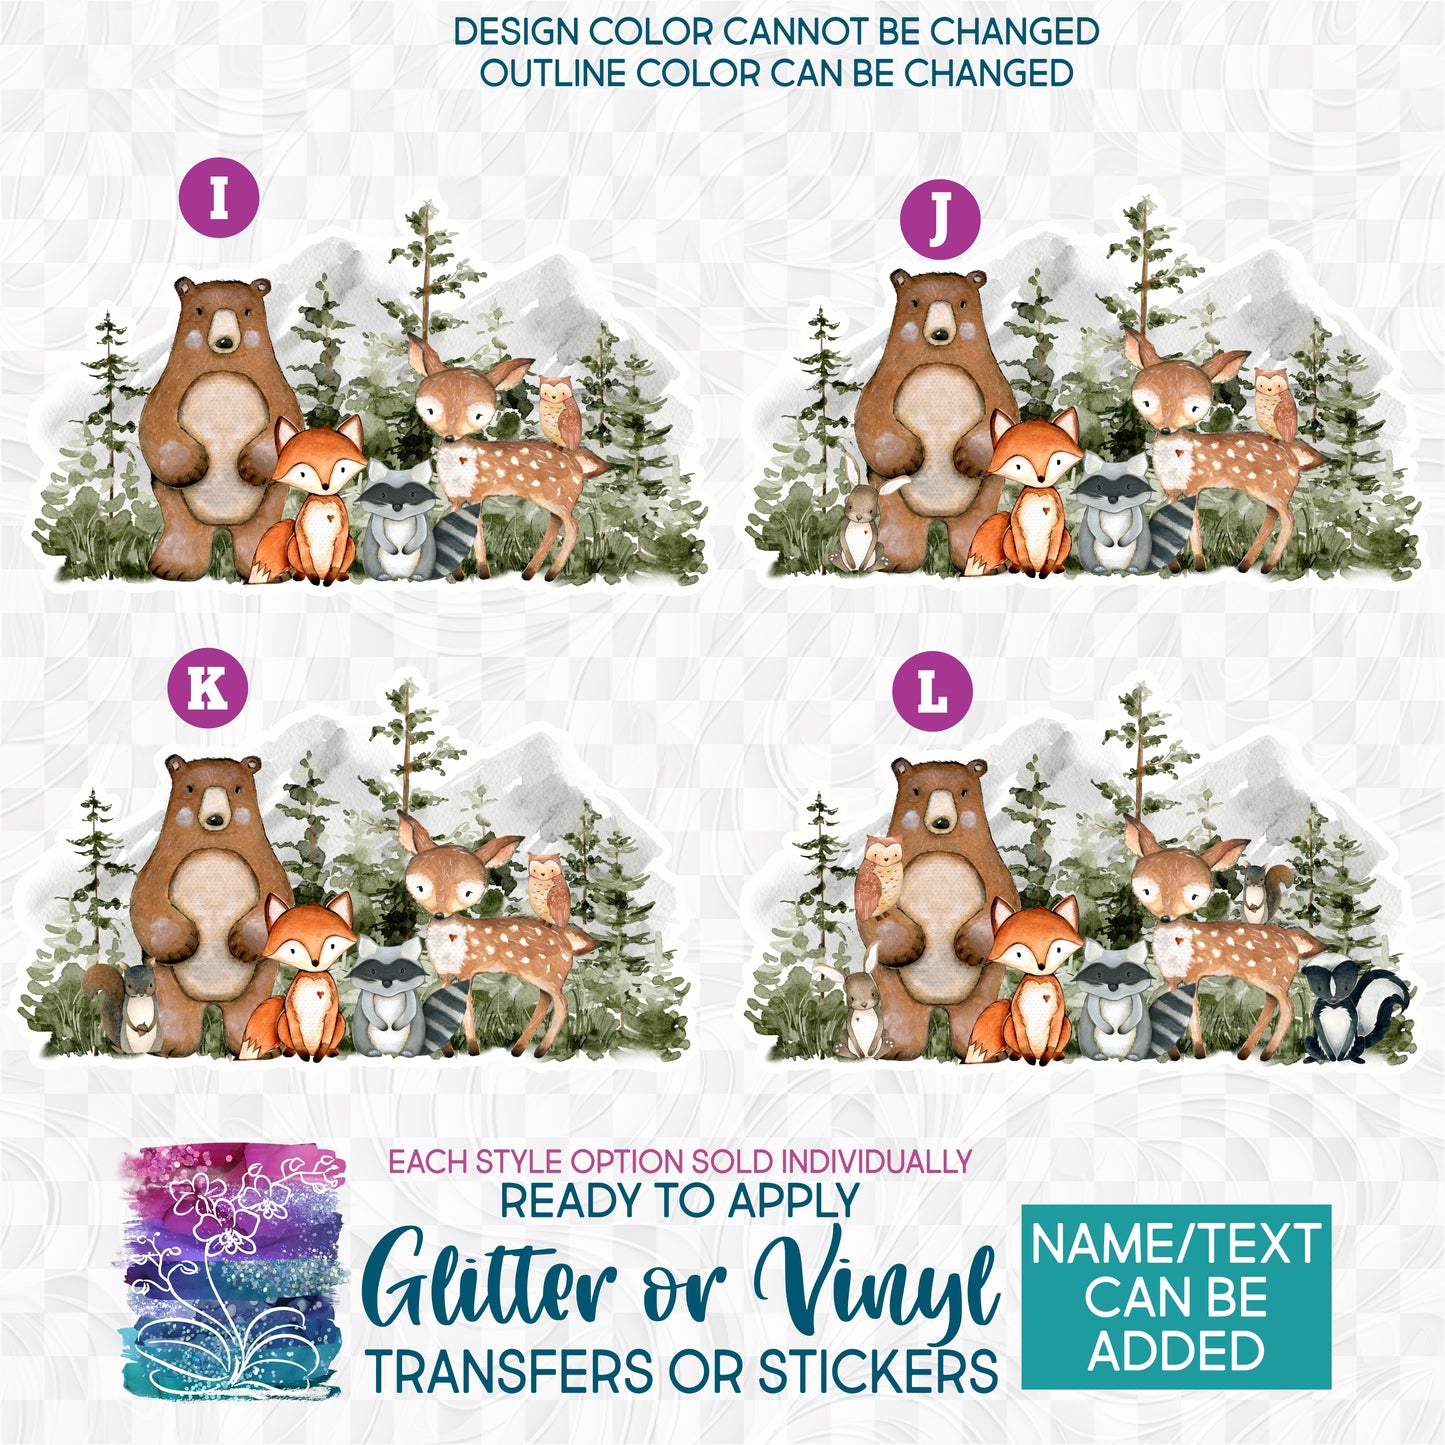 (s379) Watercolor Woodland Animals Forest Landscape Glitter or Vinyl Iron-On Transfer or Sticker